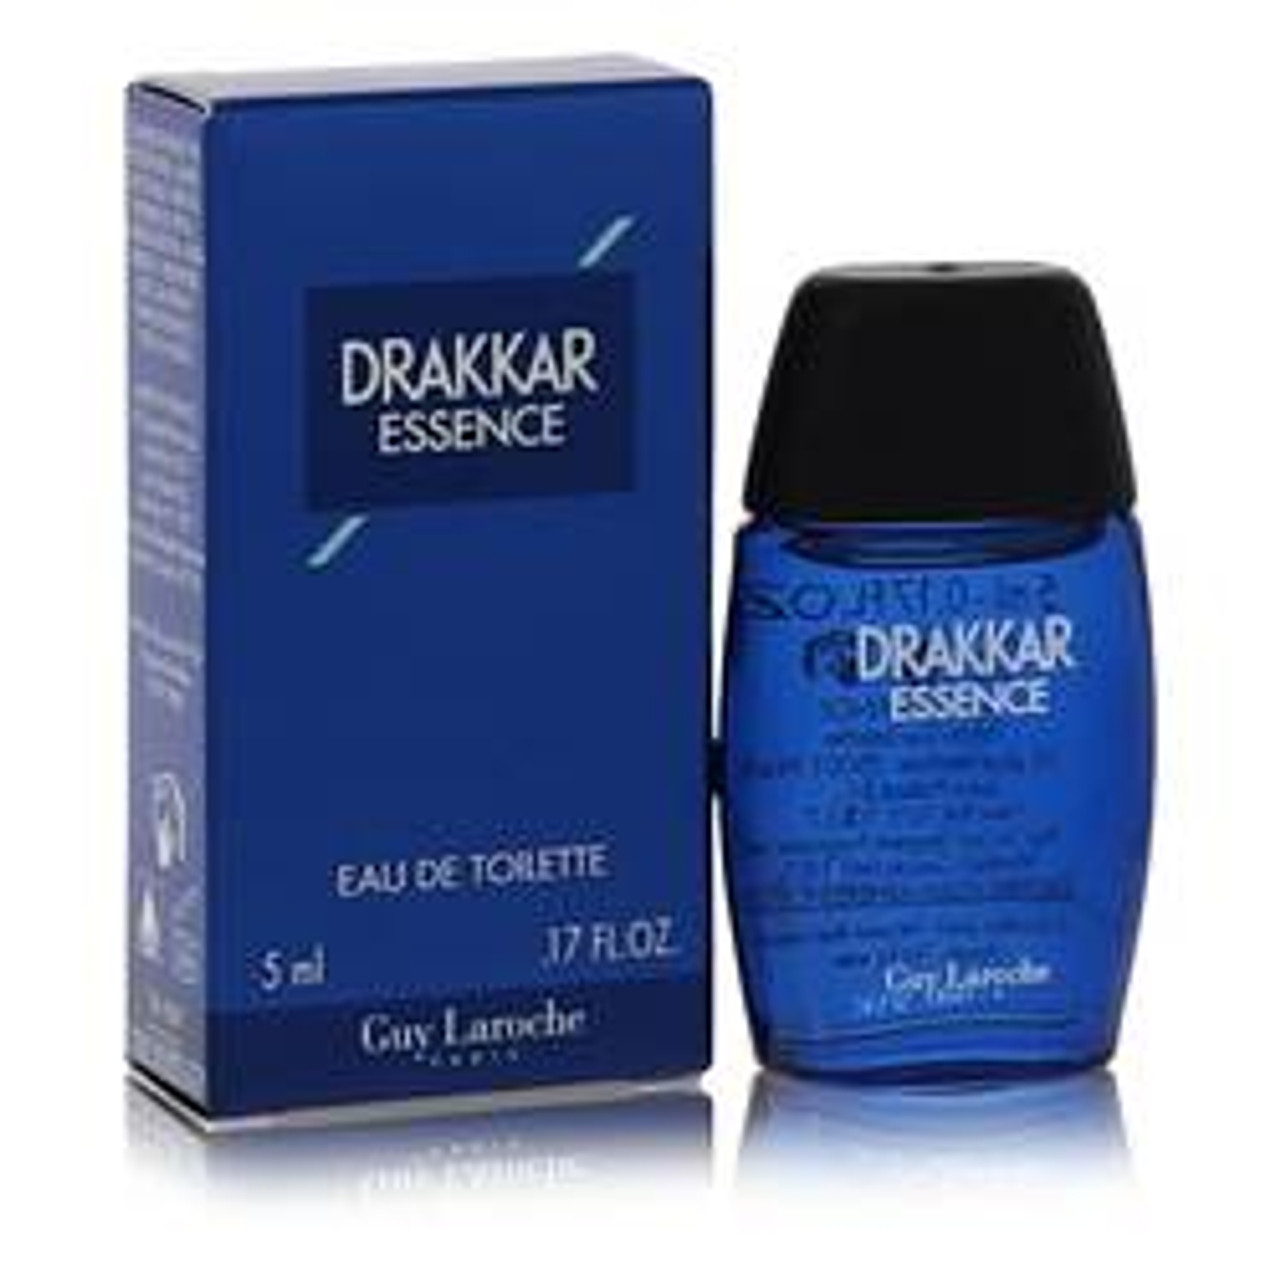 Drakkar Essence Cologne By Guy Laroche Mini EDT 0.17 oz for Men - [From 23.00 - Choose pk Qty ] - *Ships from Miami